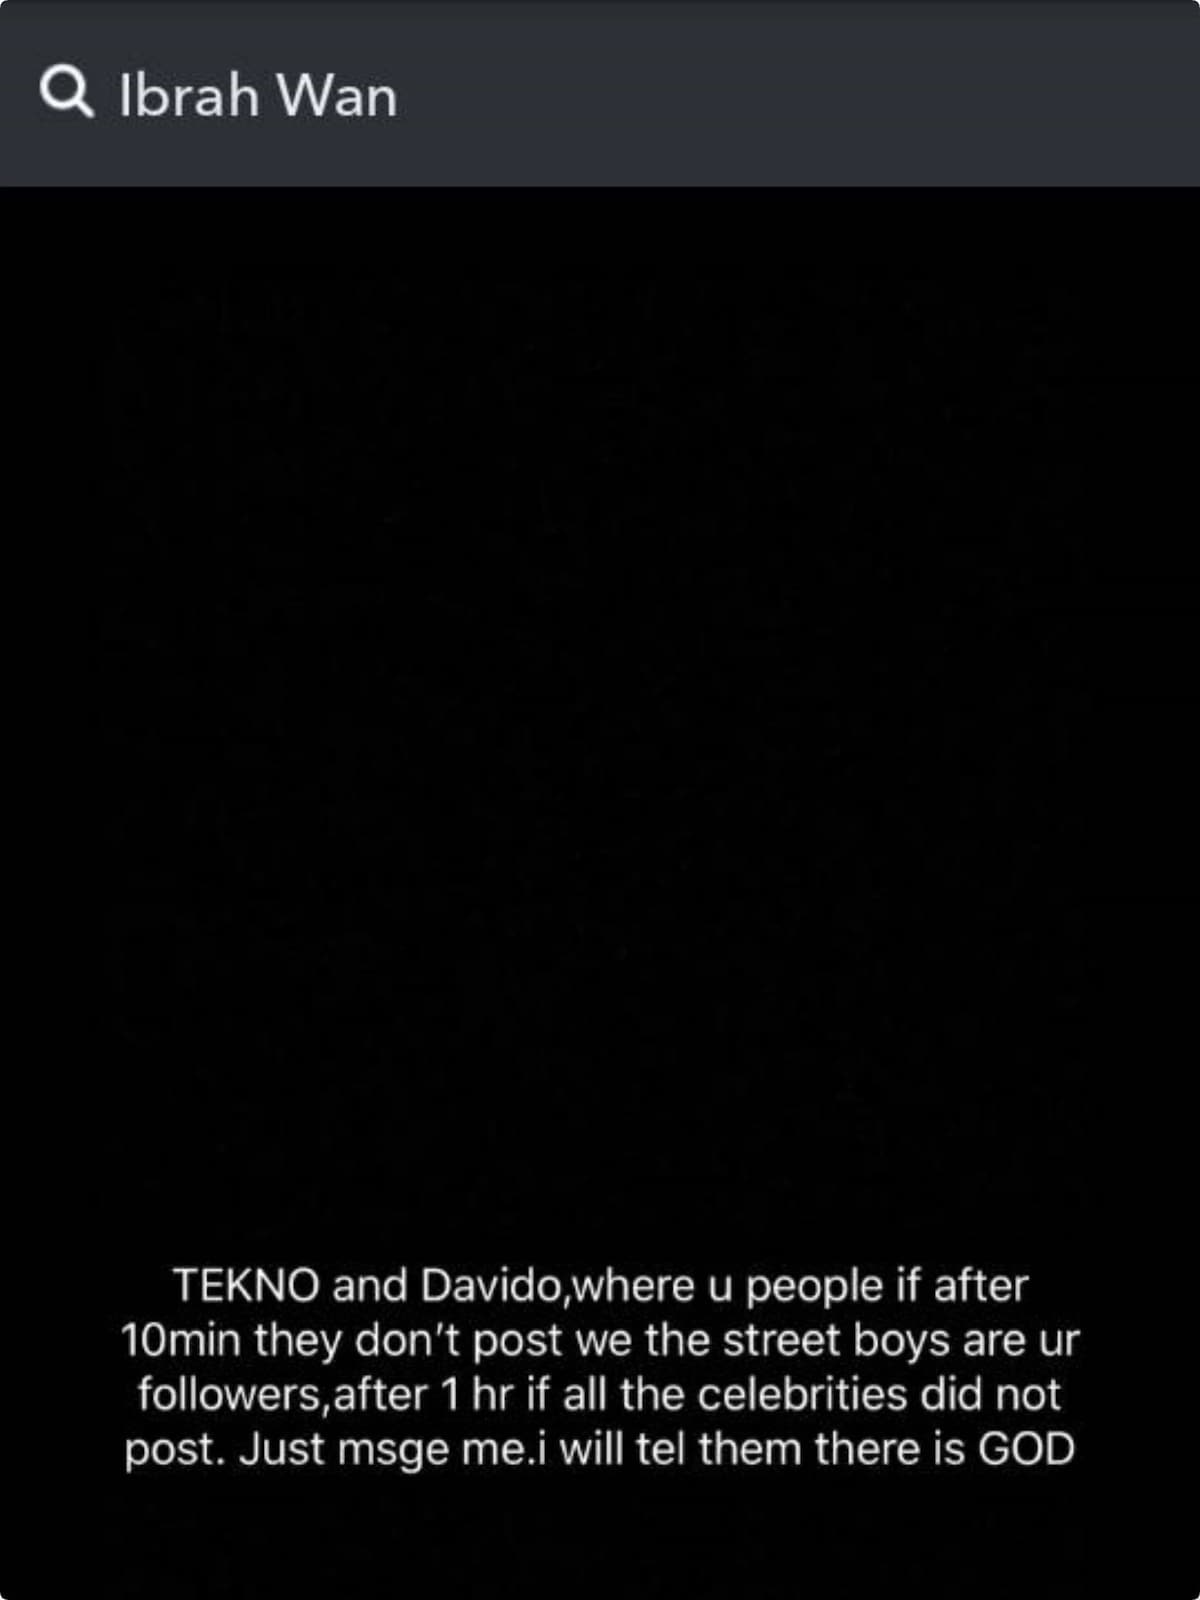 Don't drag my name into your 'madness' - Davido spits fire on Ibrah One